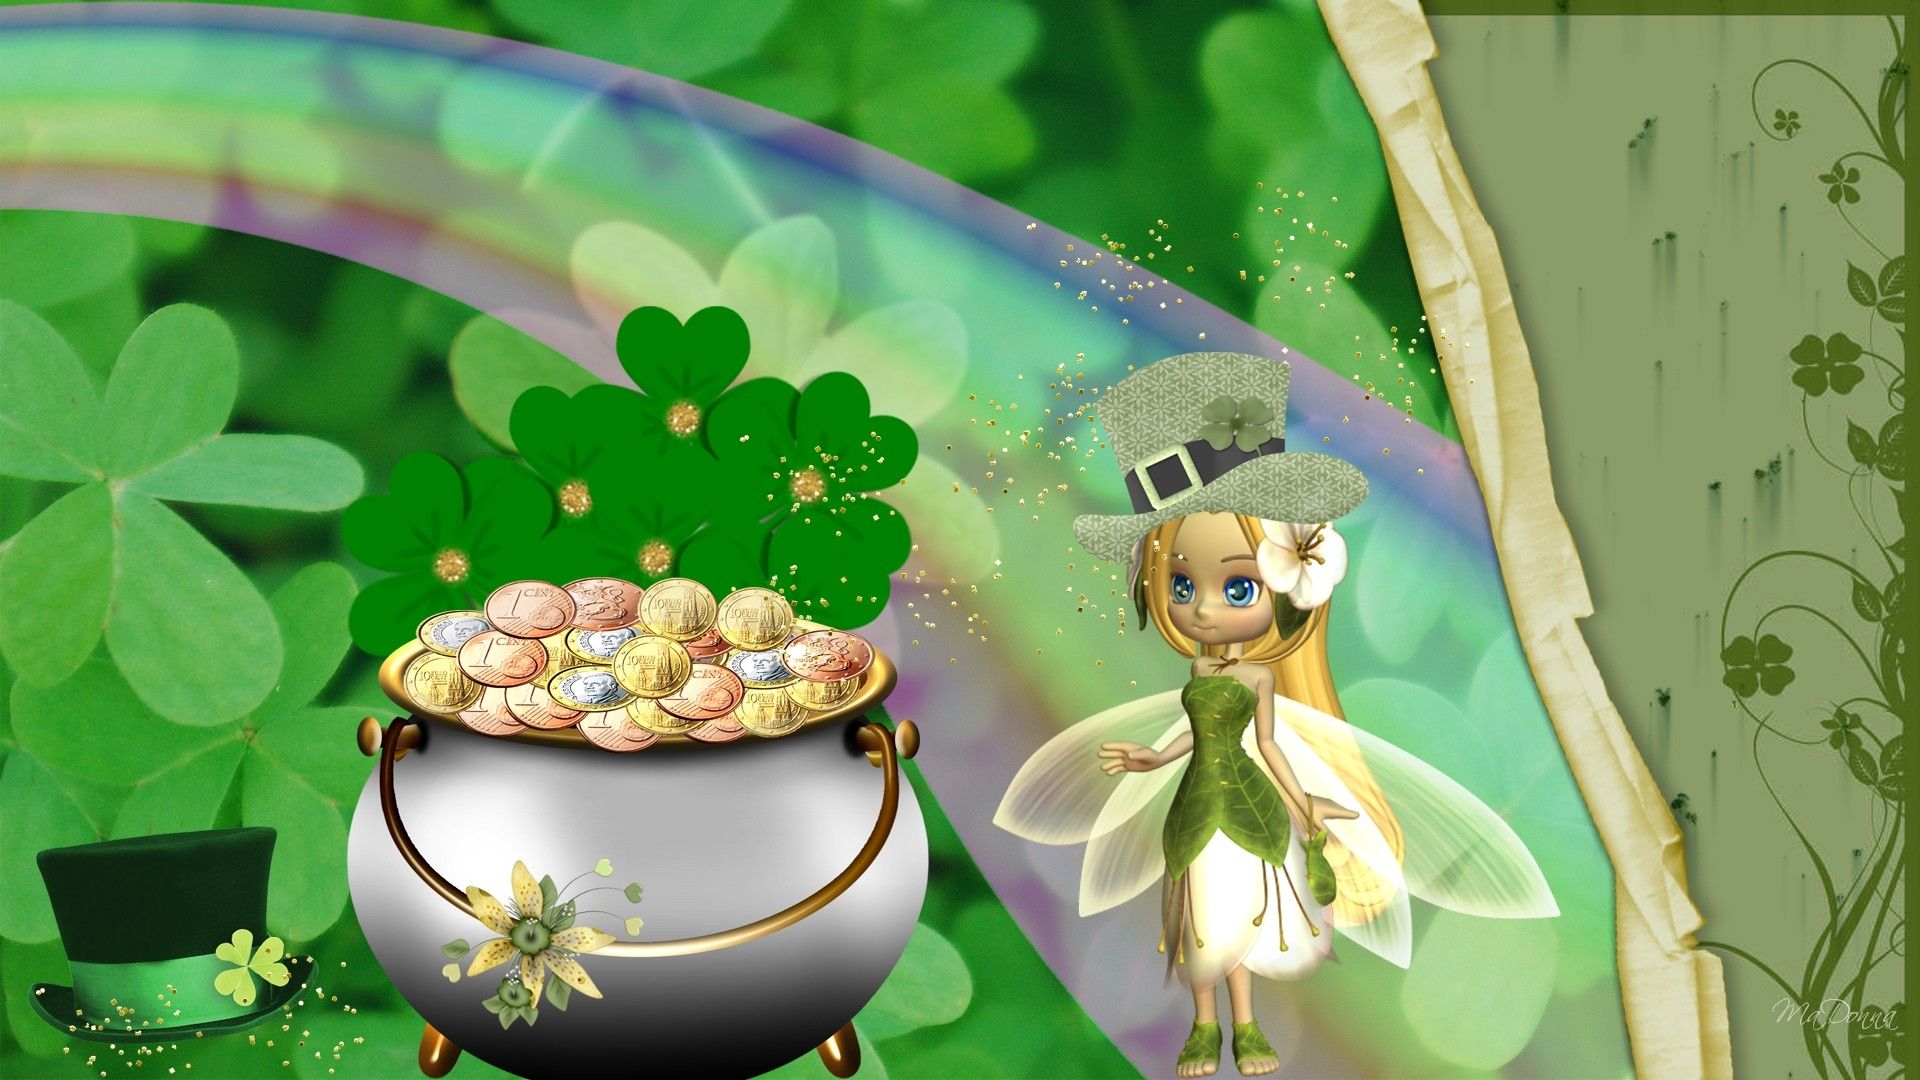 Saint Patrick's Day 1920x1080, High Definition, High Quality, Widescreen